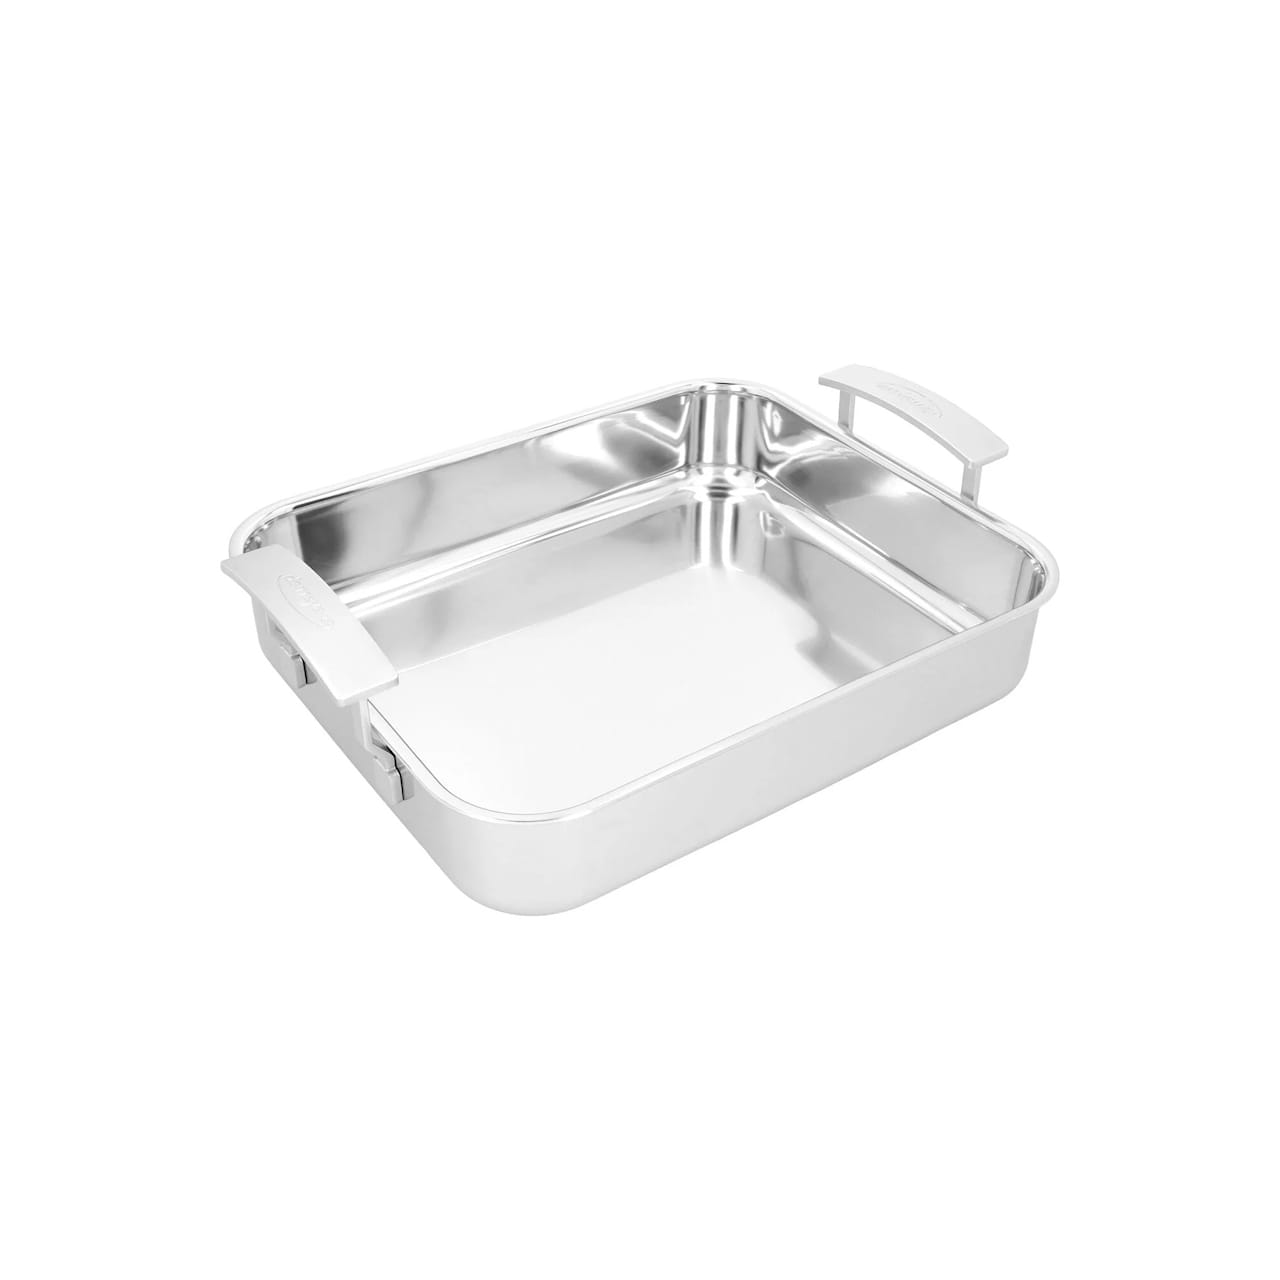 Industry 5 Oven dish - 32x26.5 cm